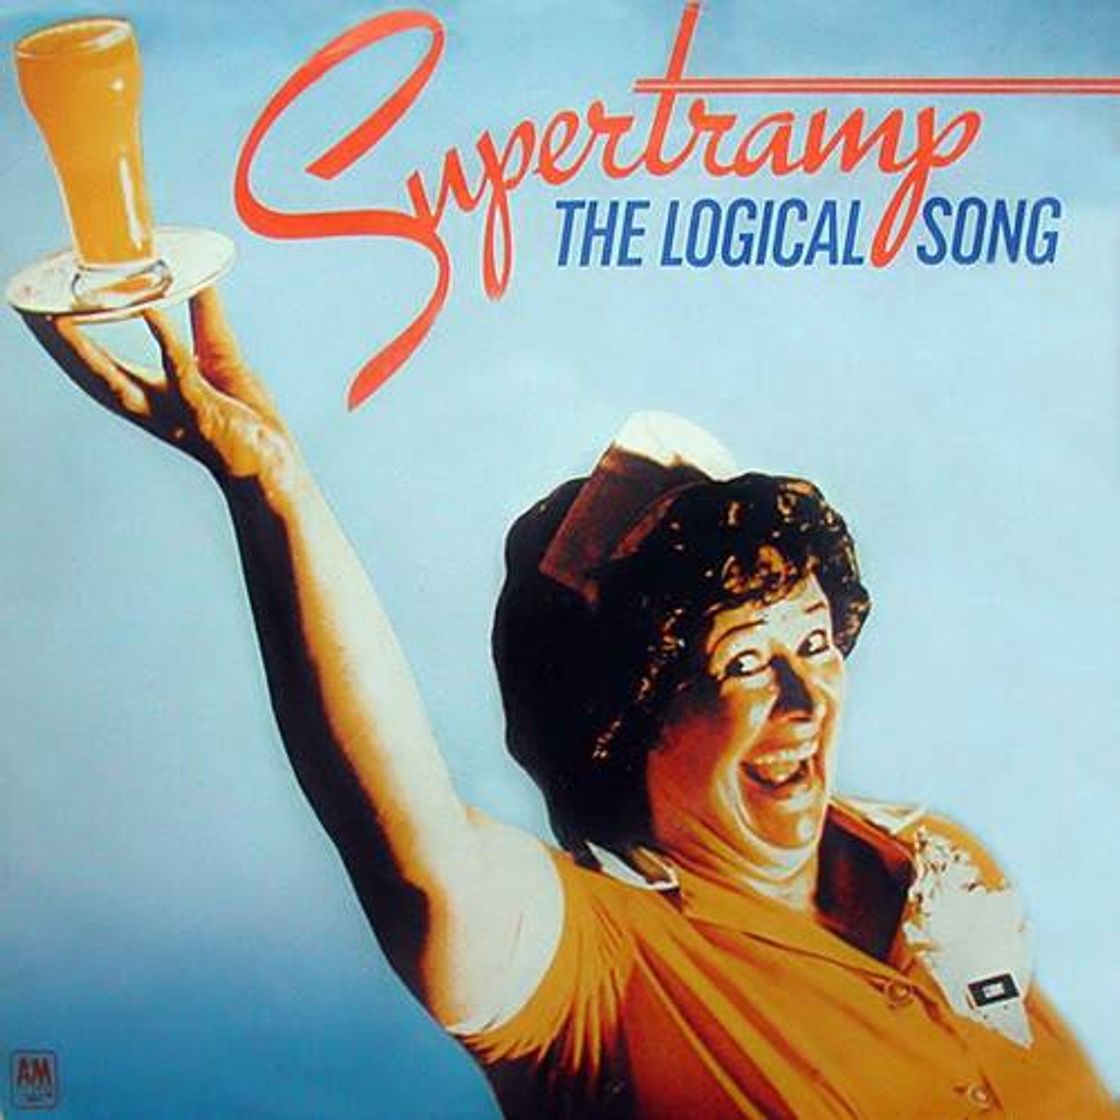 The logical song_ Supertramp